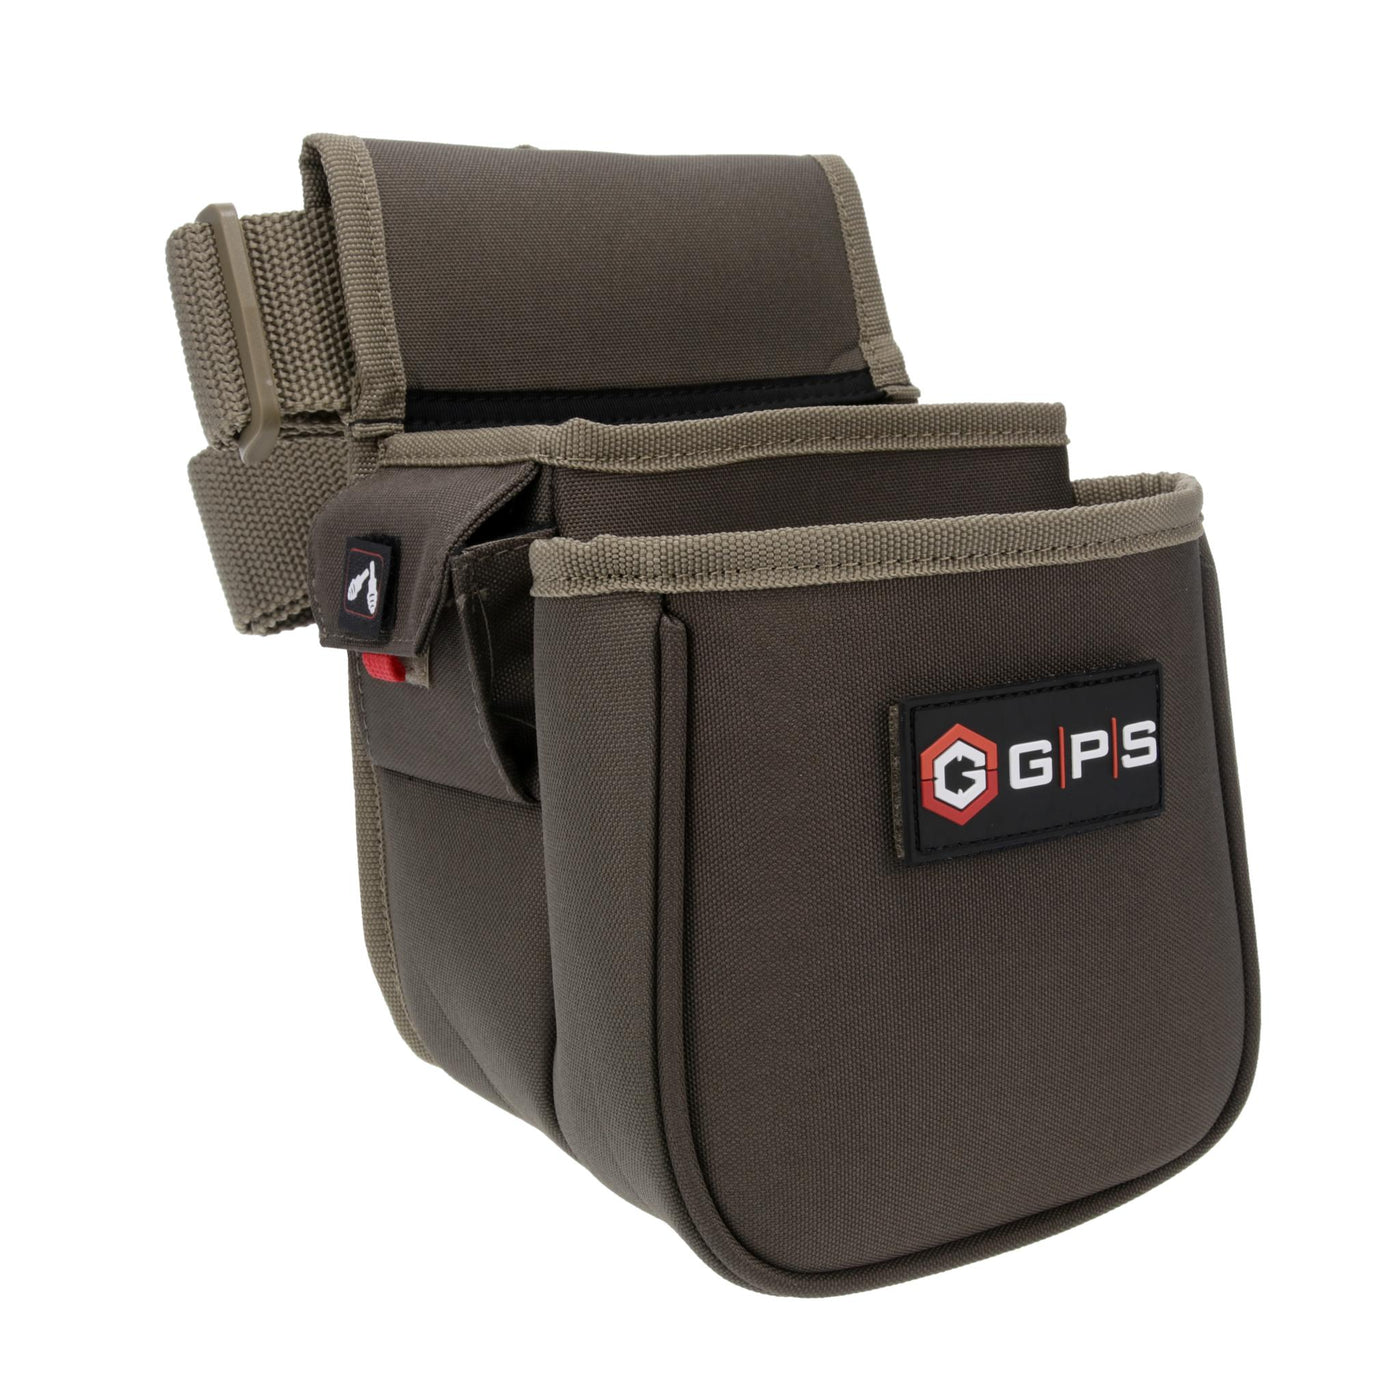 GPS Contoured Double Shotshell Pouches & Web Belt-Hunting/Outdoors-Green/Khaki-Kevin's Fine Outdoor Gear & Apparel